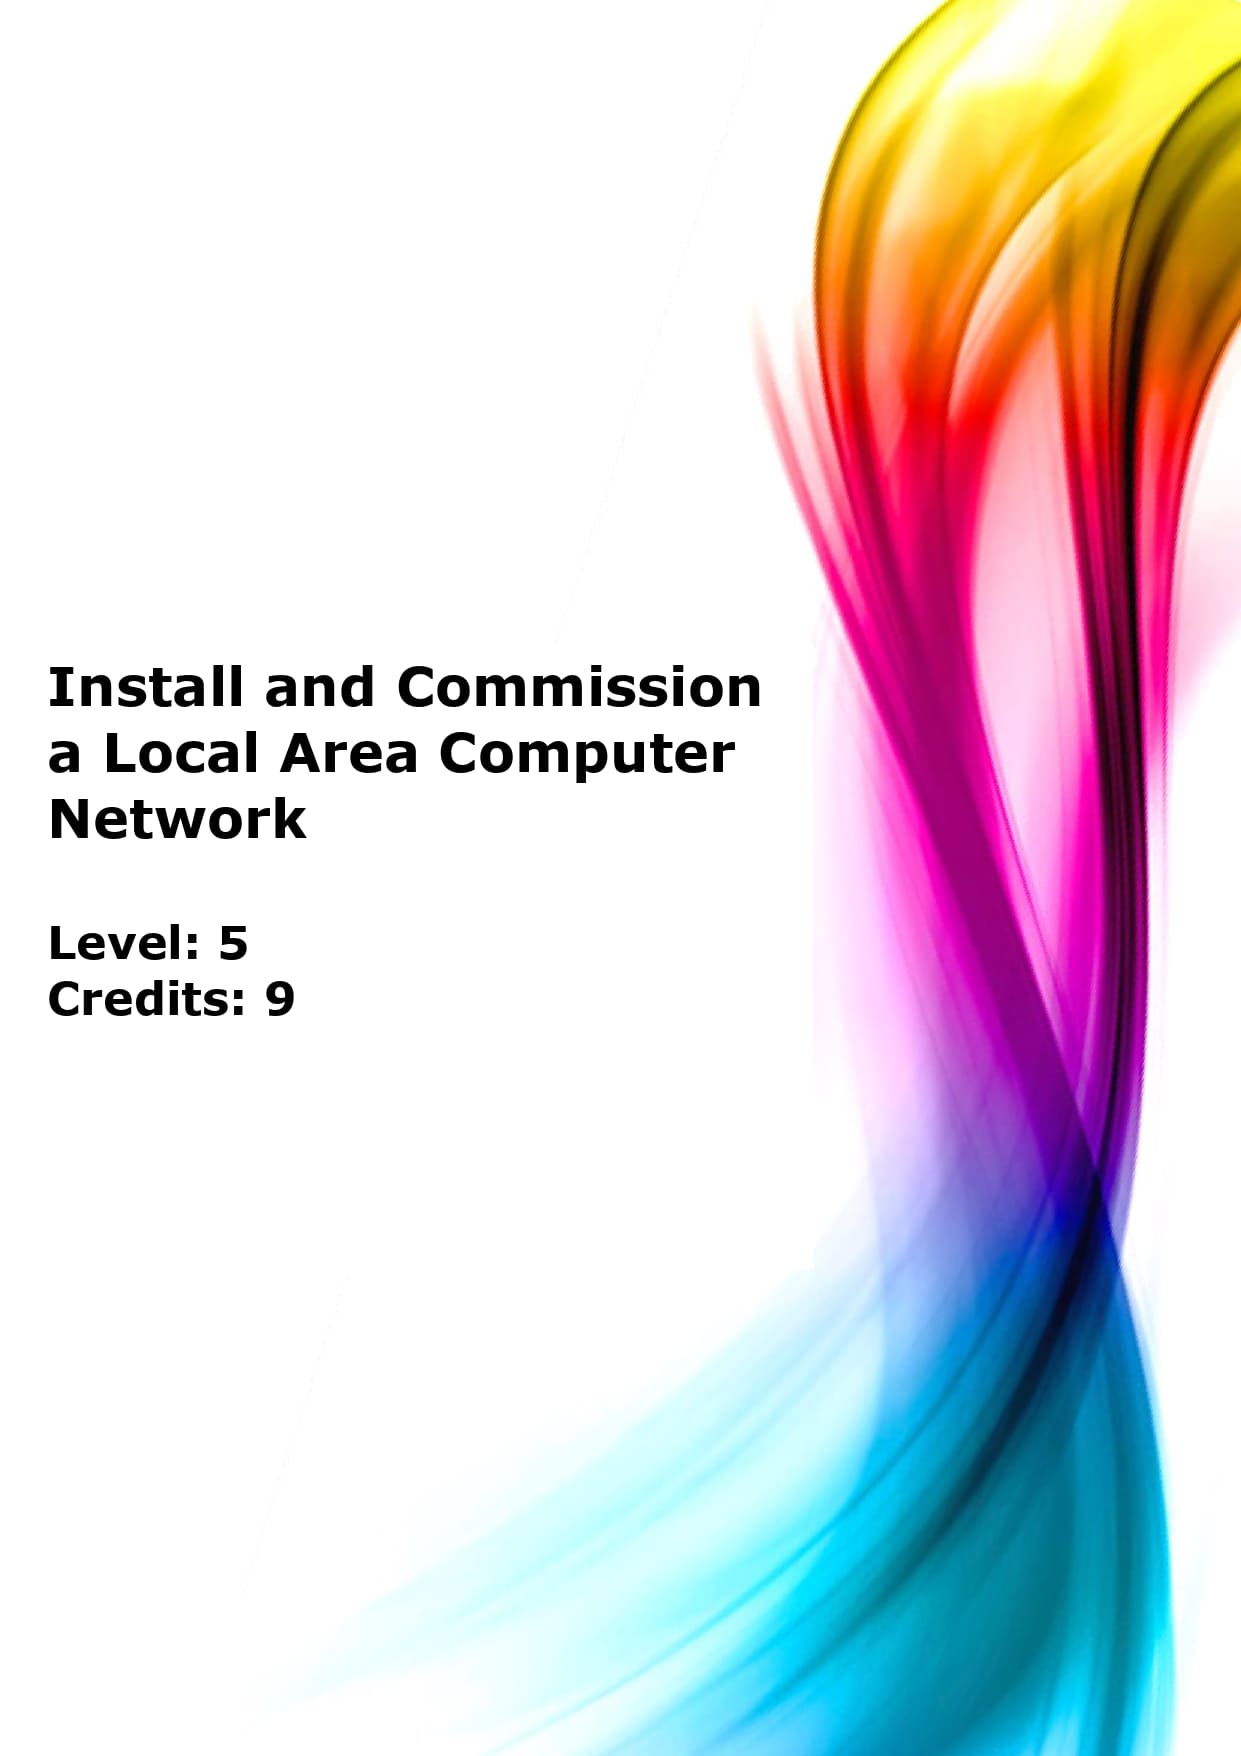 Install and commission a local area computer network US